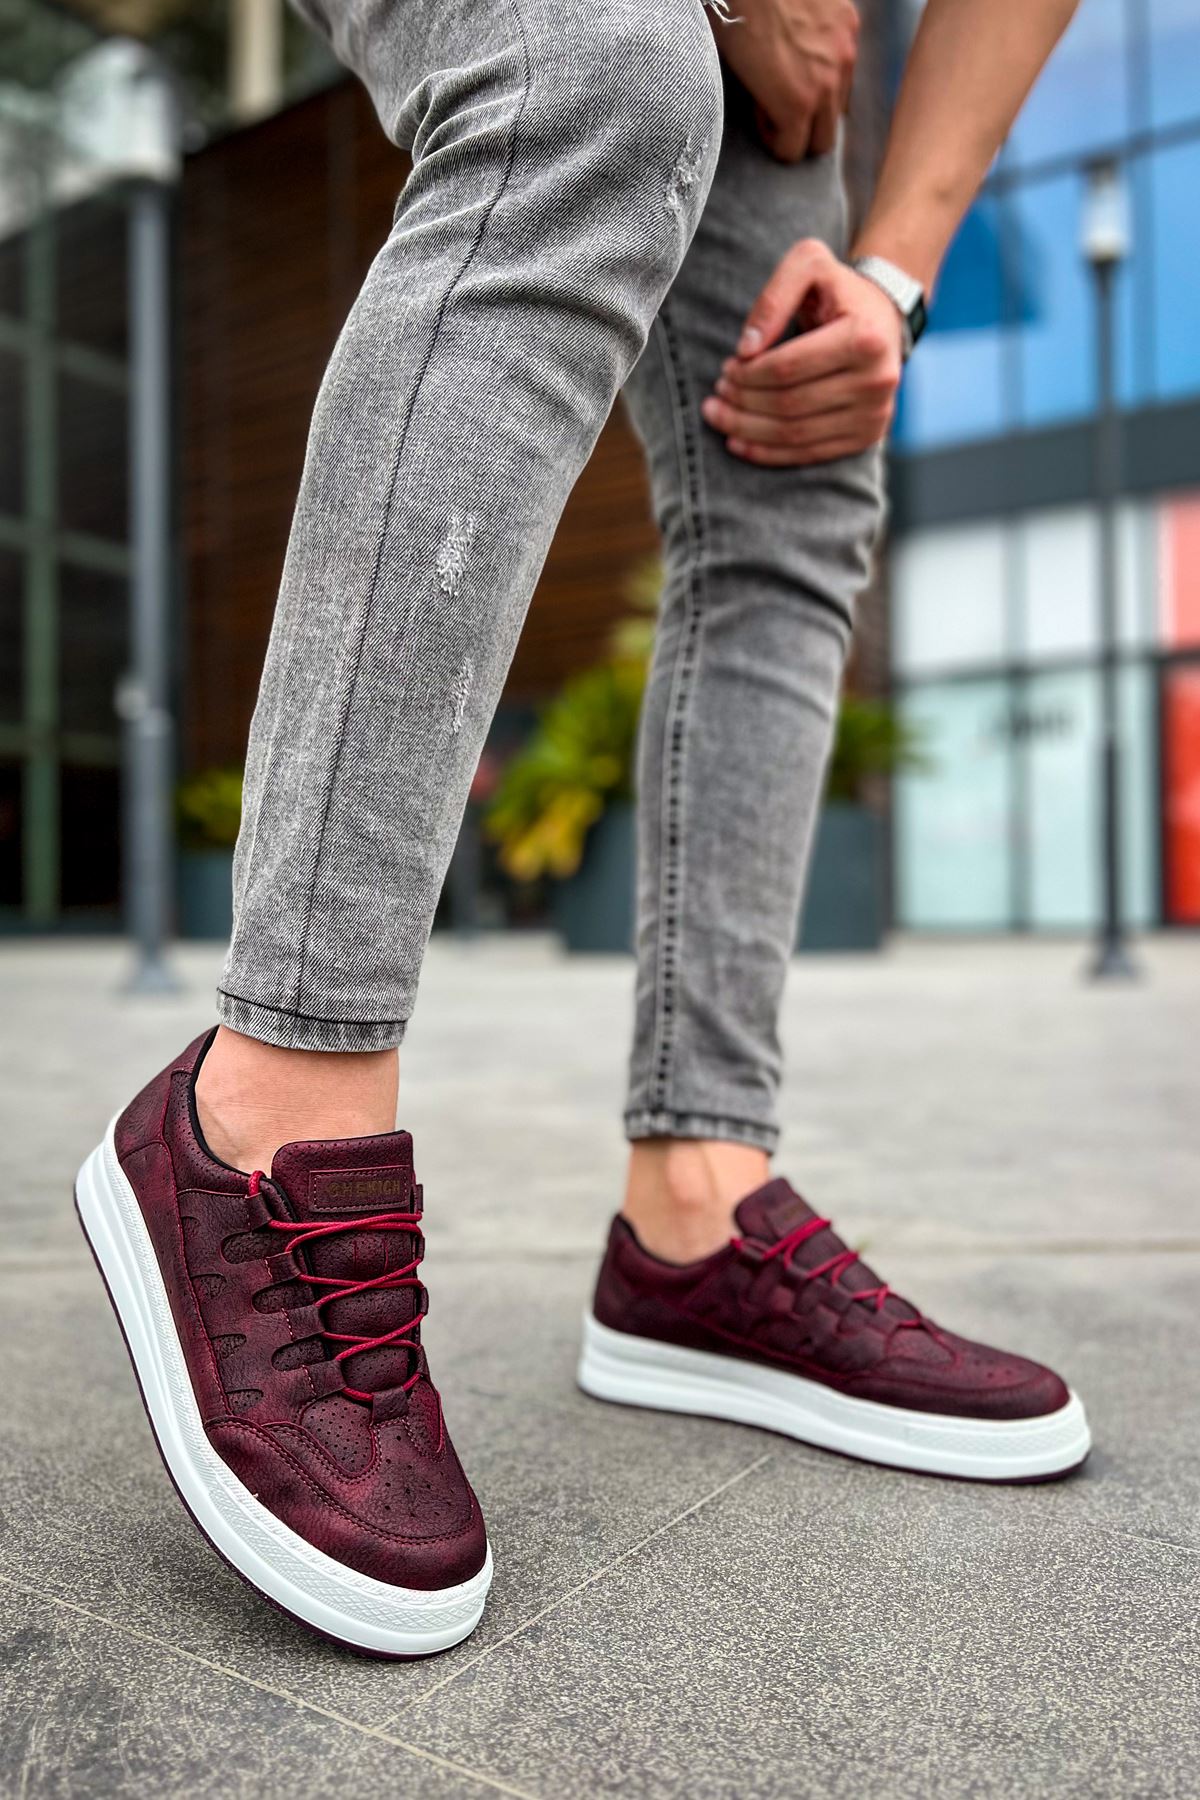 CH040 Men's Unisex Orthopedics Burgundy-White Sole Casual Sneaker Sports Shoes - STREETMODE ™